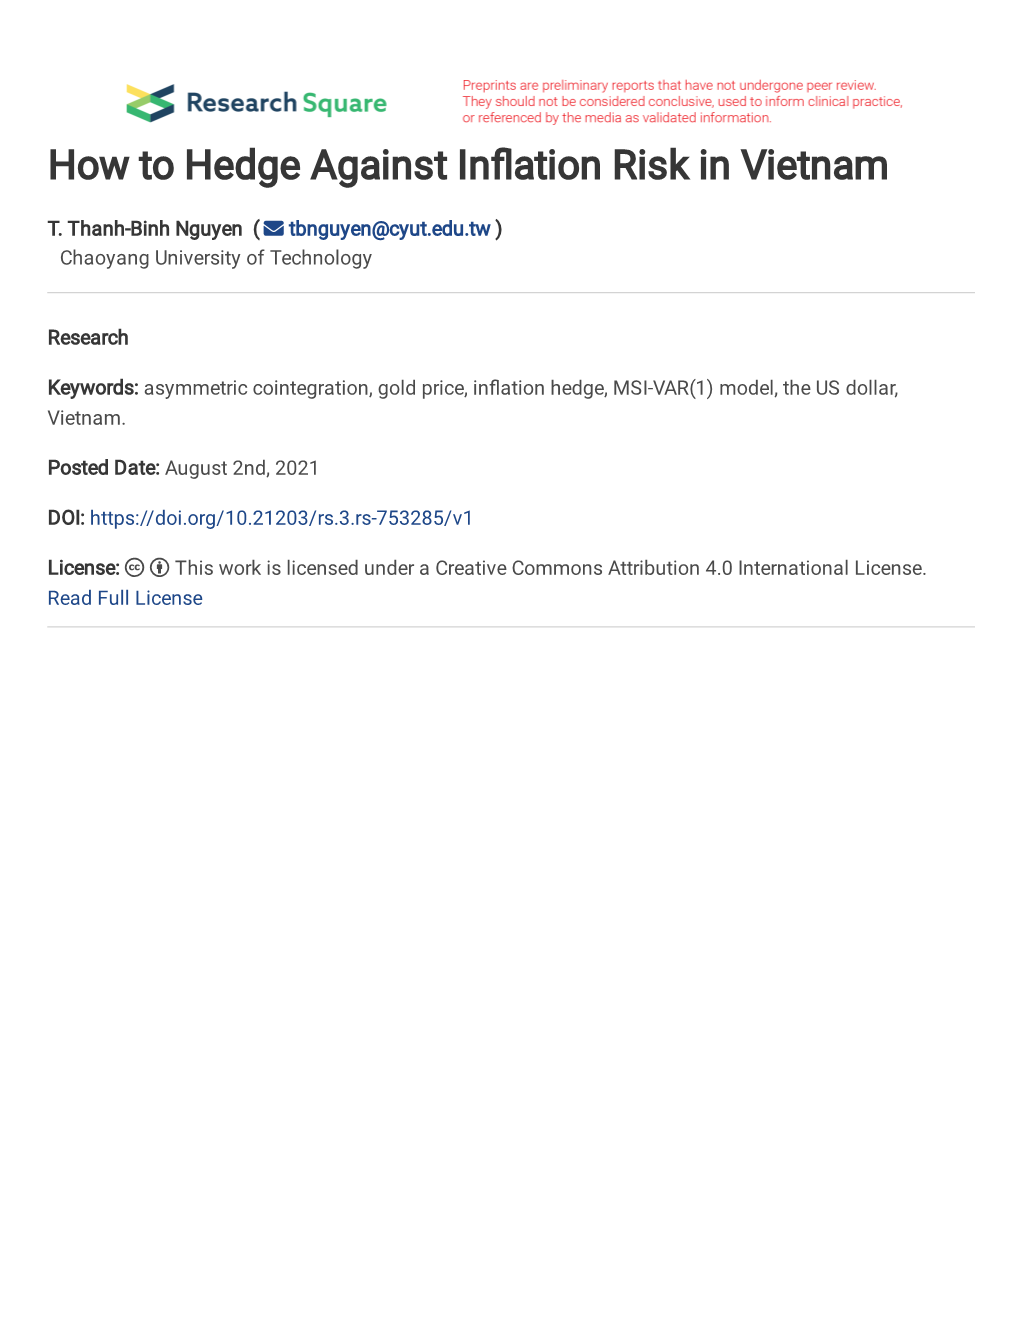 How to Hedge Against in Ation Risk in Vietnam